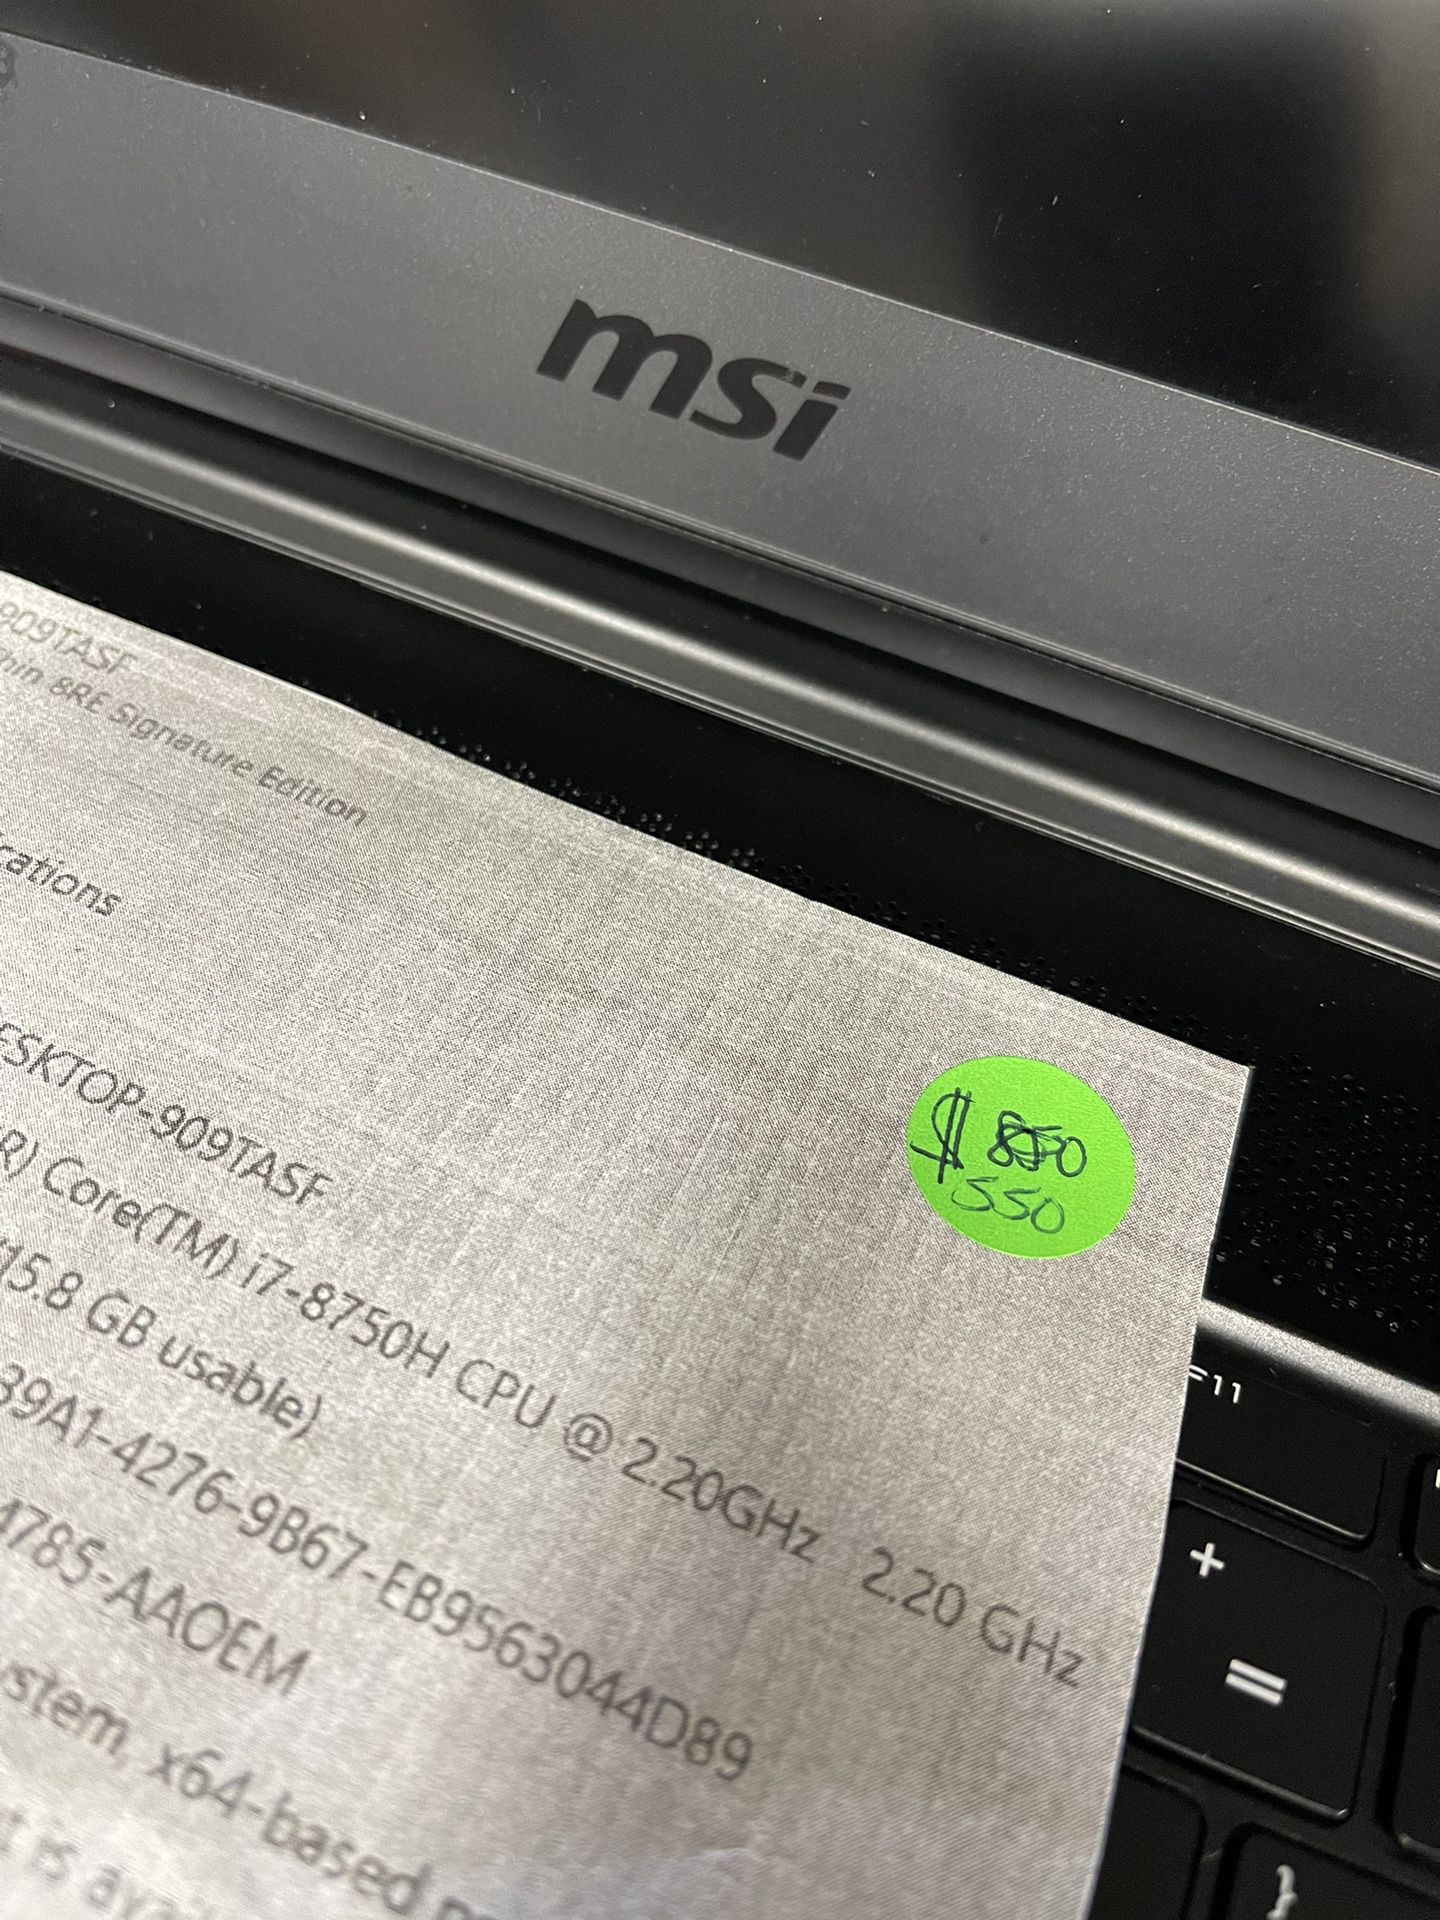 MSI G565, Gaming Laptop, 256 Gb, Excellent Condition With 30 Day Warranty